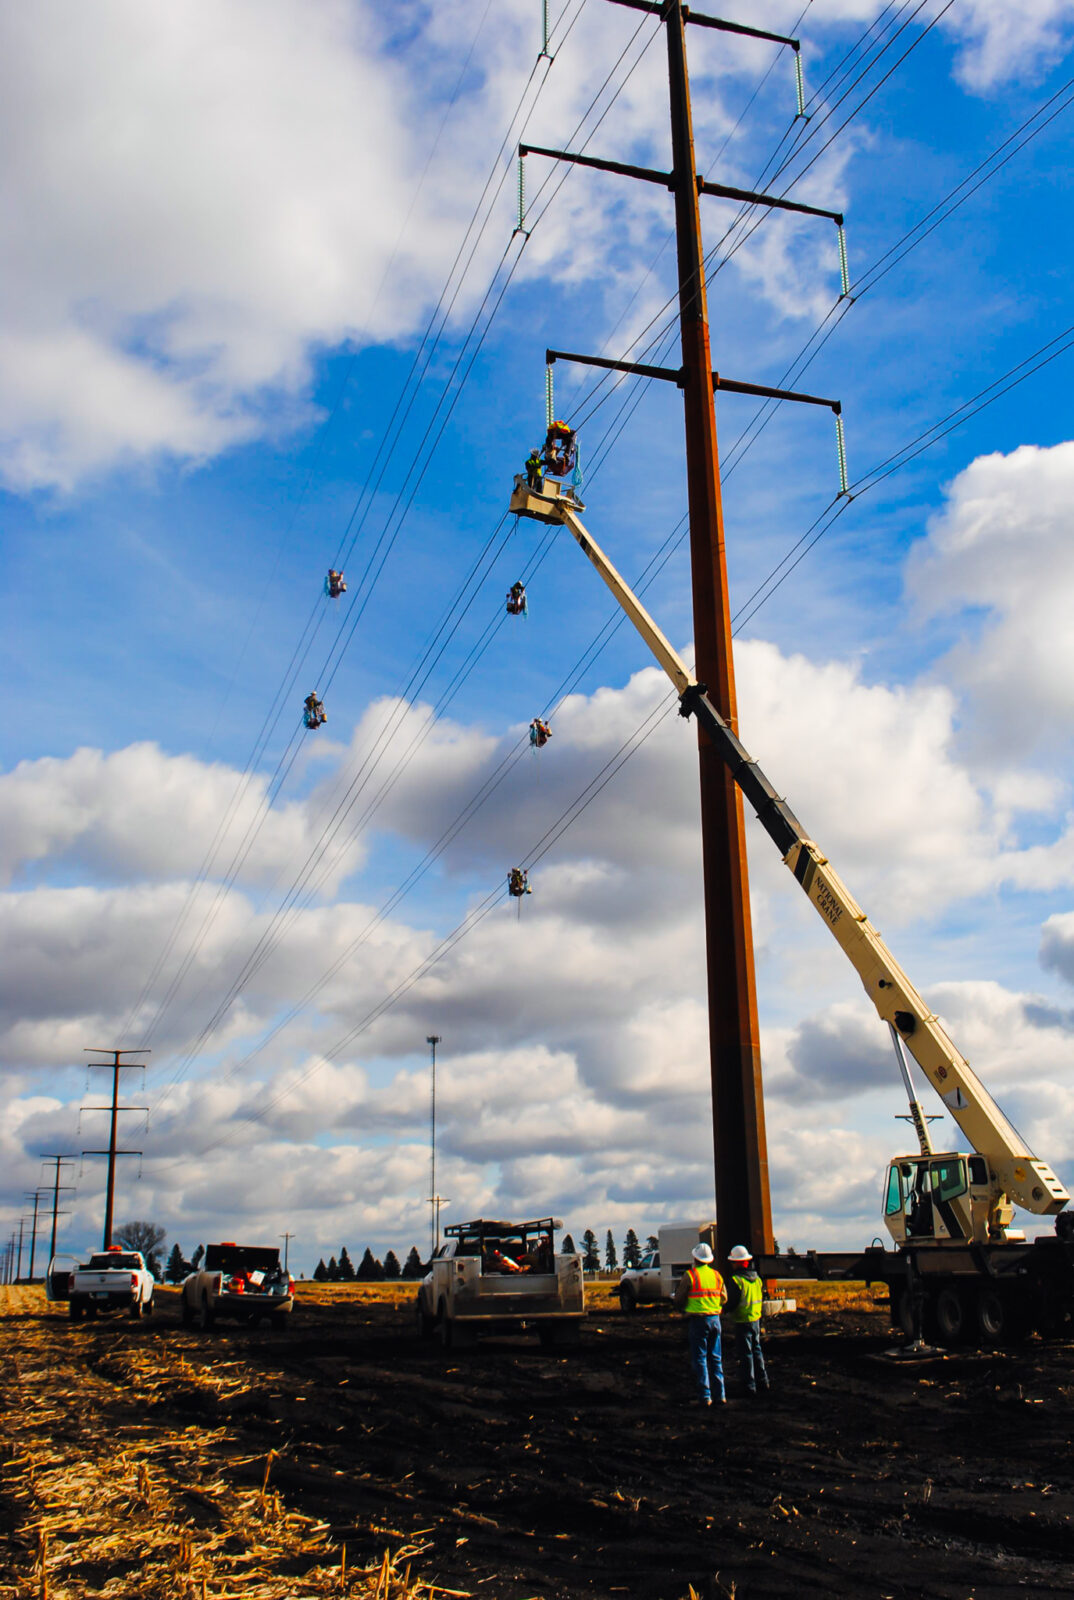 Crane elevates L.E. Myers employee to work on transmission lines